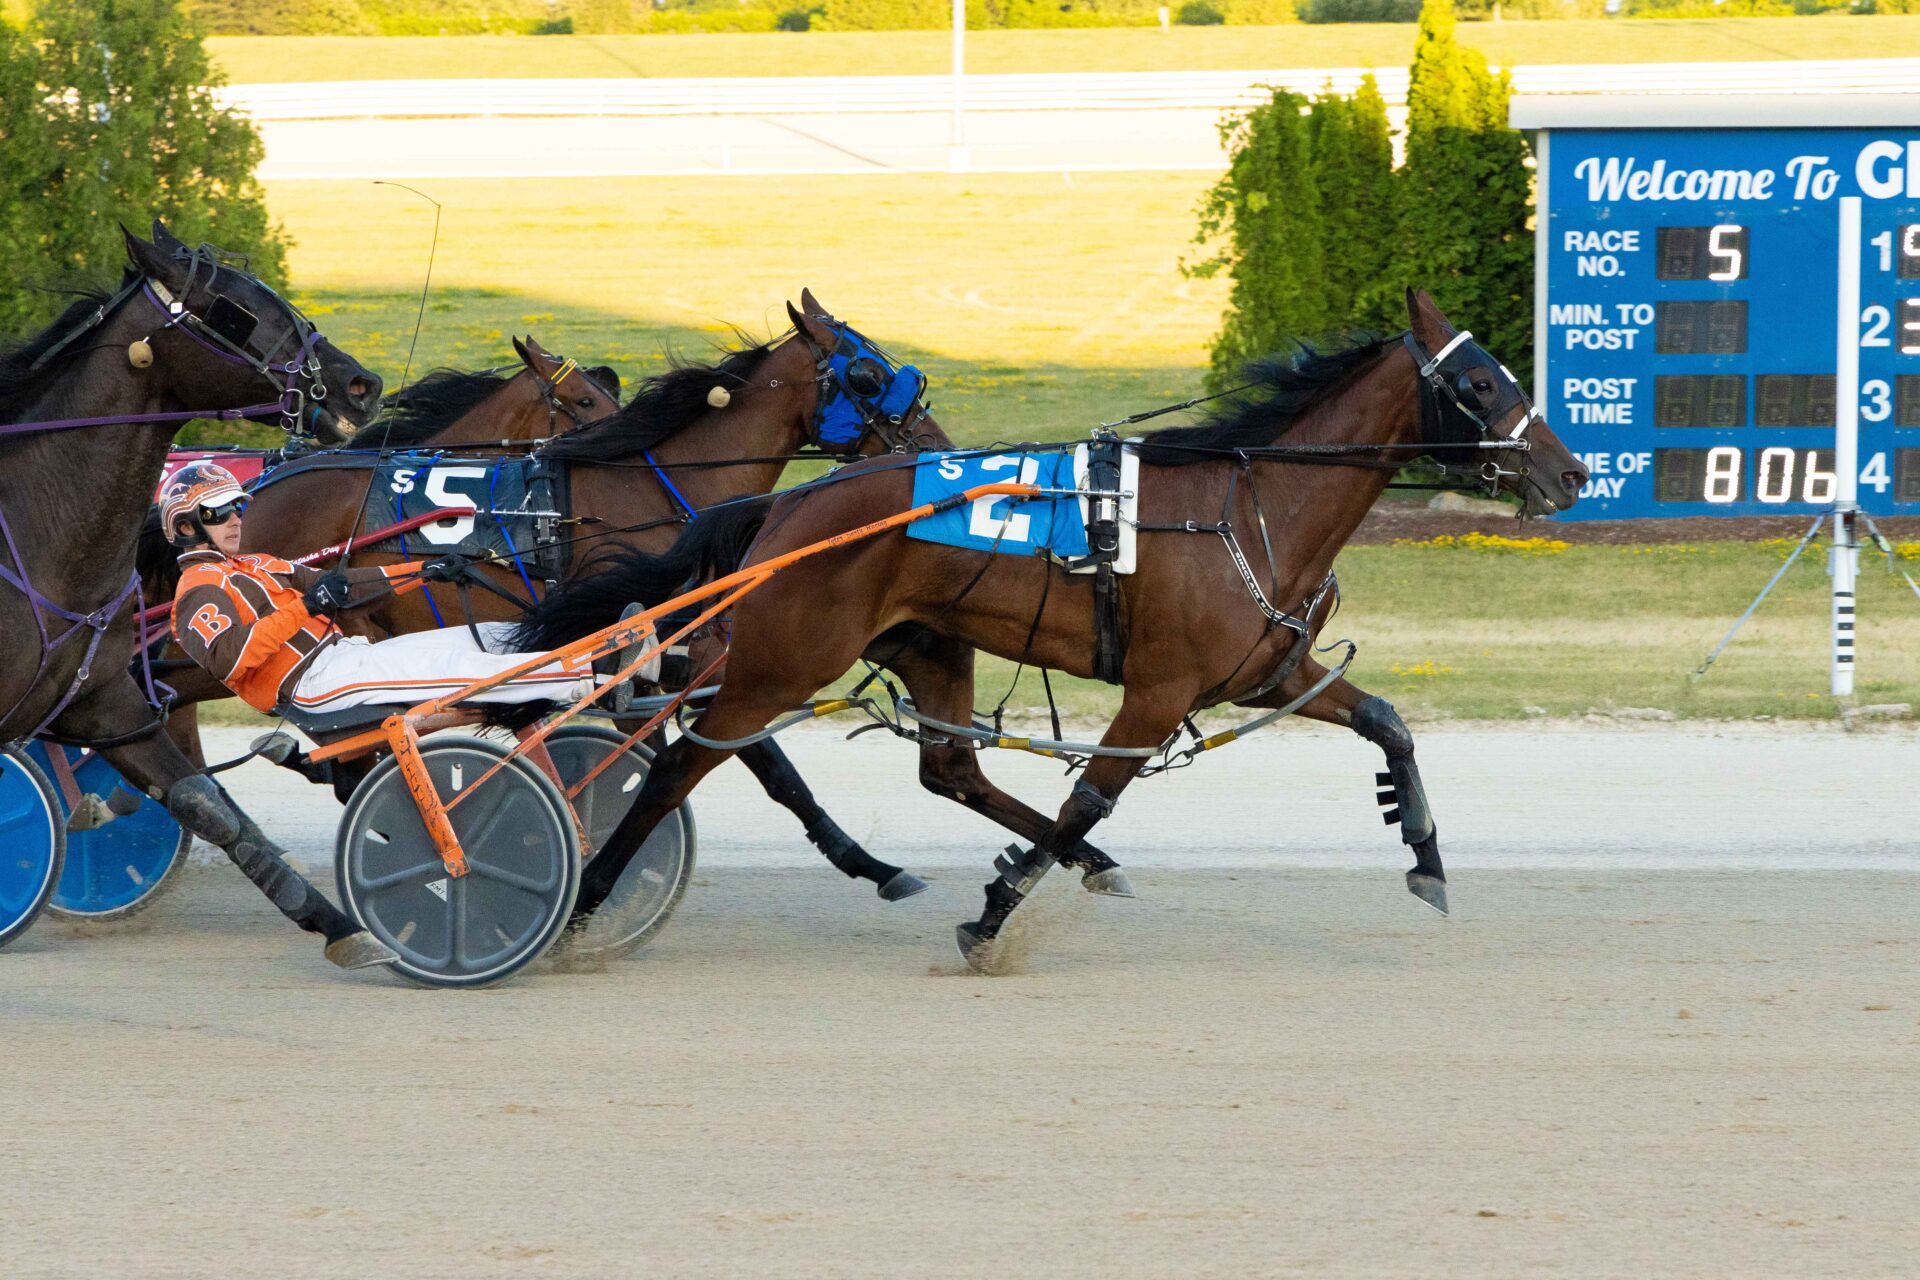 standardbred horse with horses racing behind it